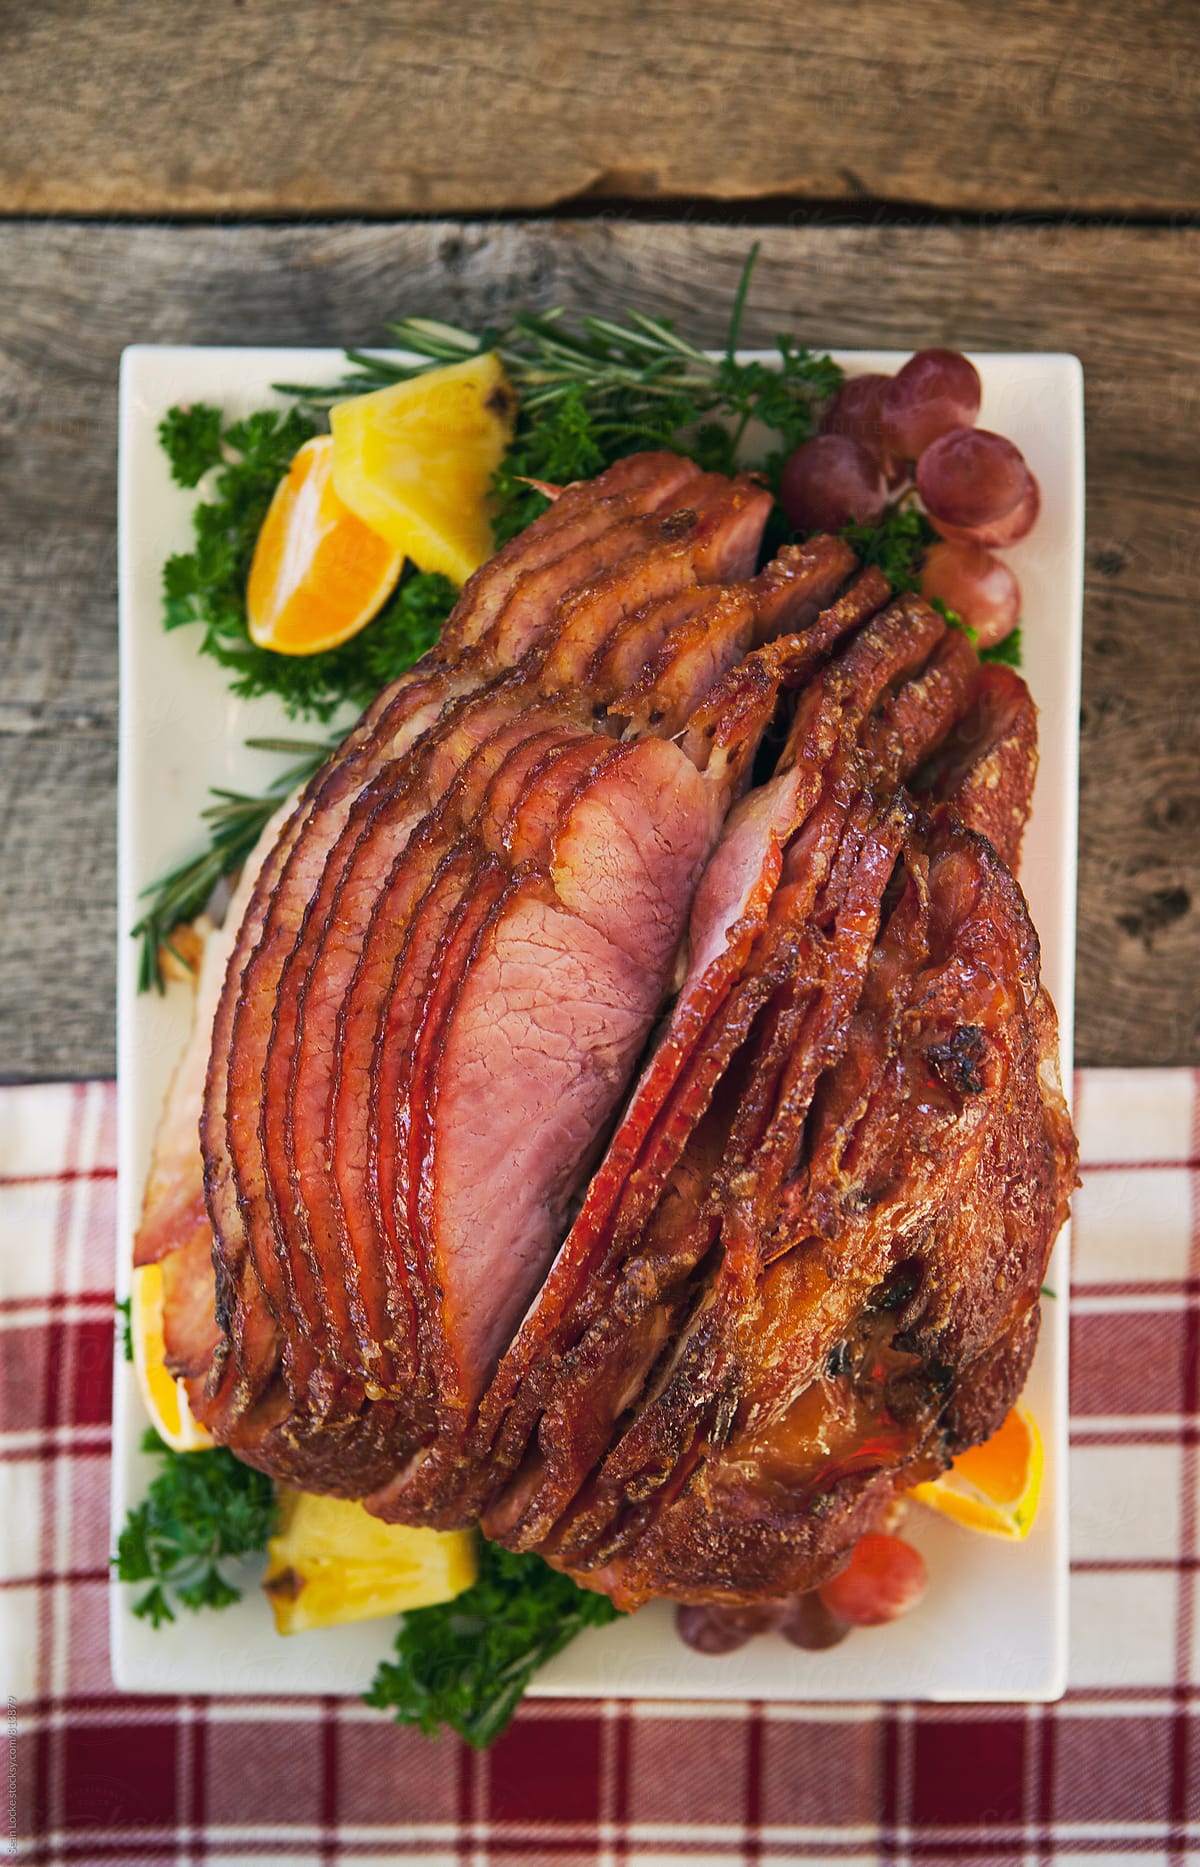 Christmas: Half Glazed Ham Ready To Be Served At Holiday Dinner